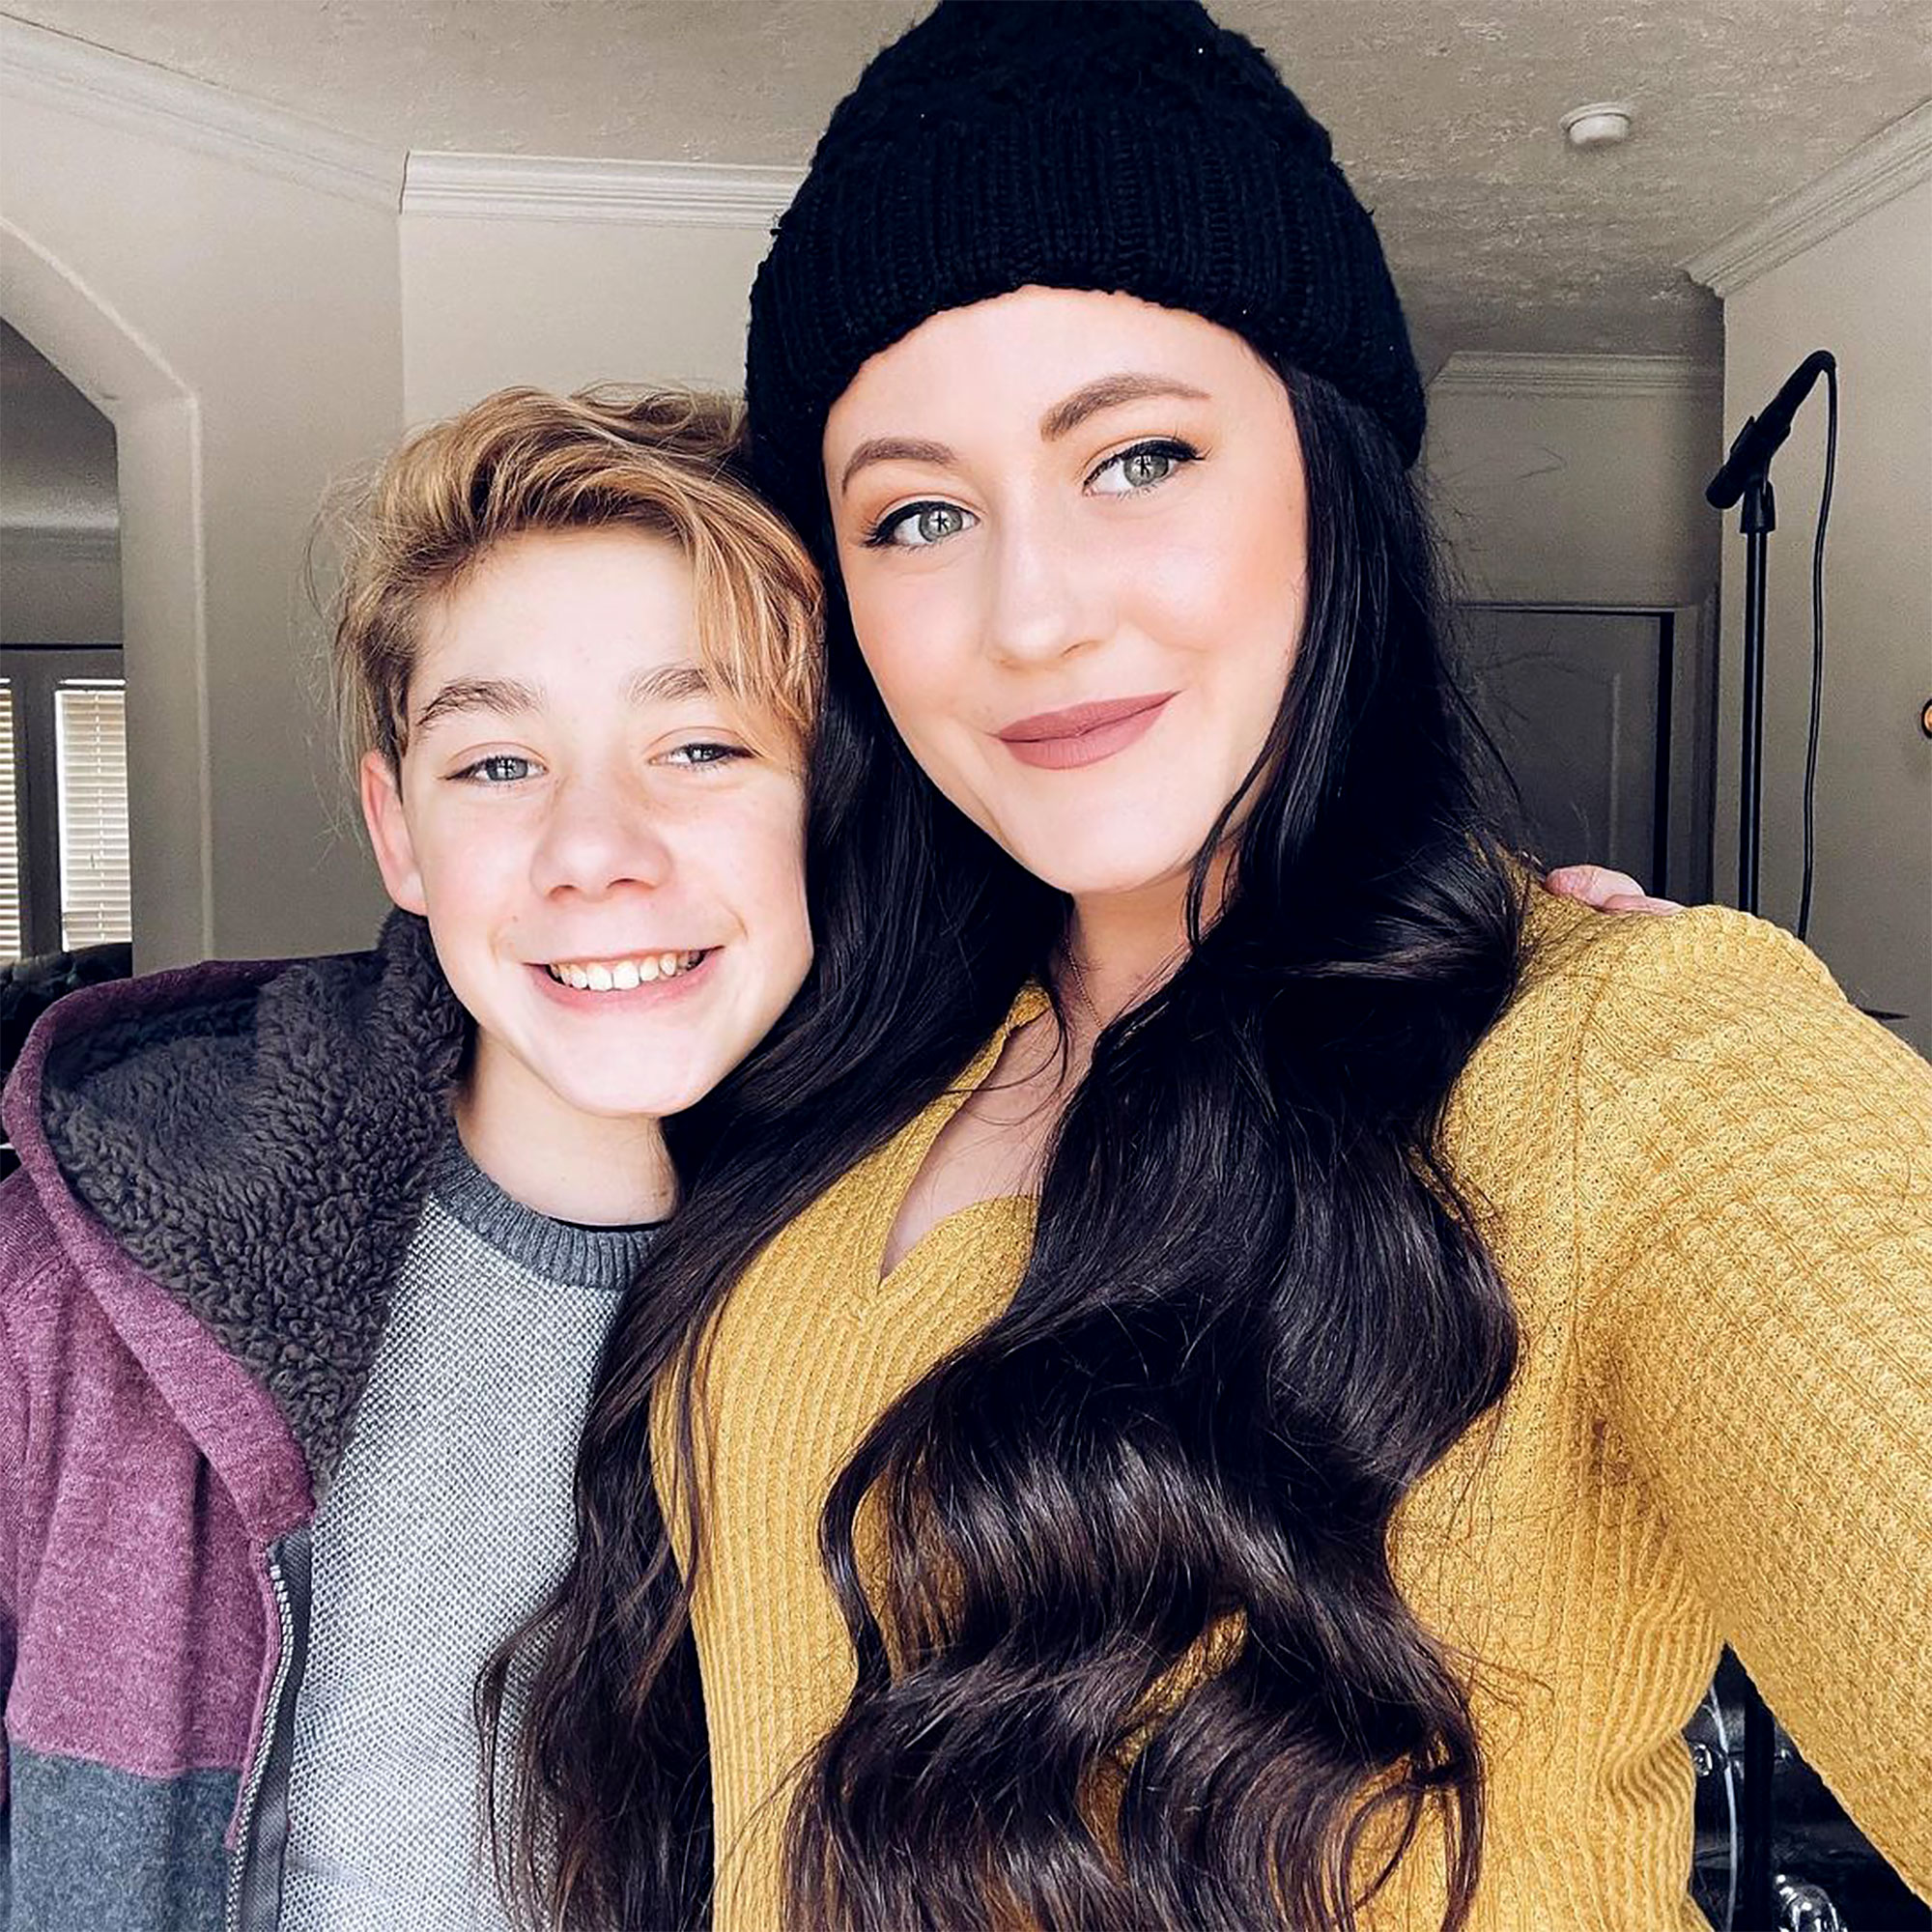 Teen Mom 2s Jenelle Evans Son Jace, 12, Looks Grown Up New Photos photo